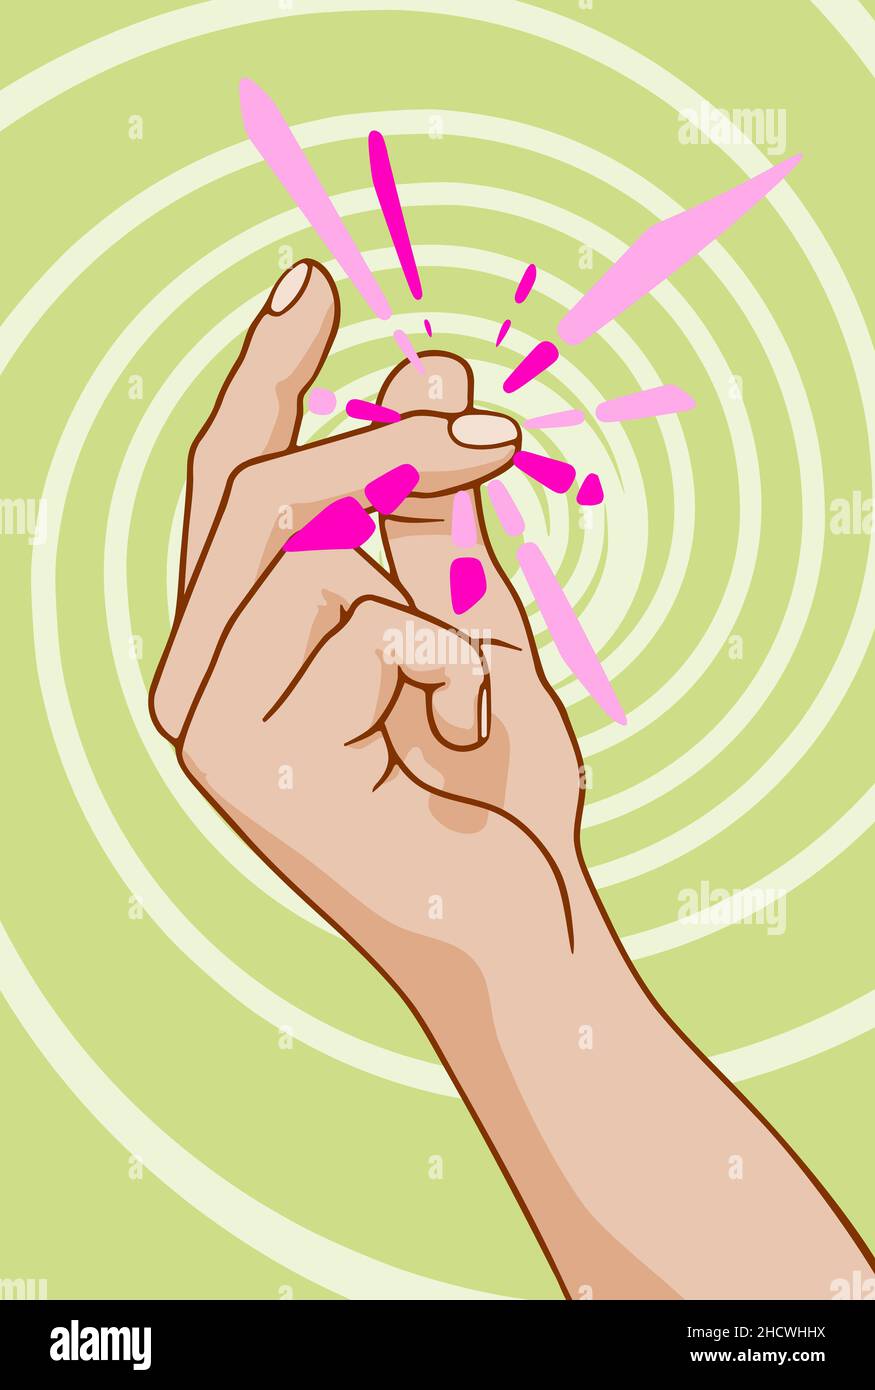 An illustration of a Snapping fingers for hypnosis Stock Photo